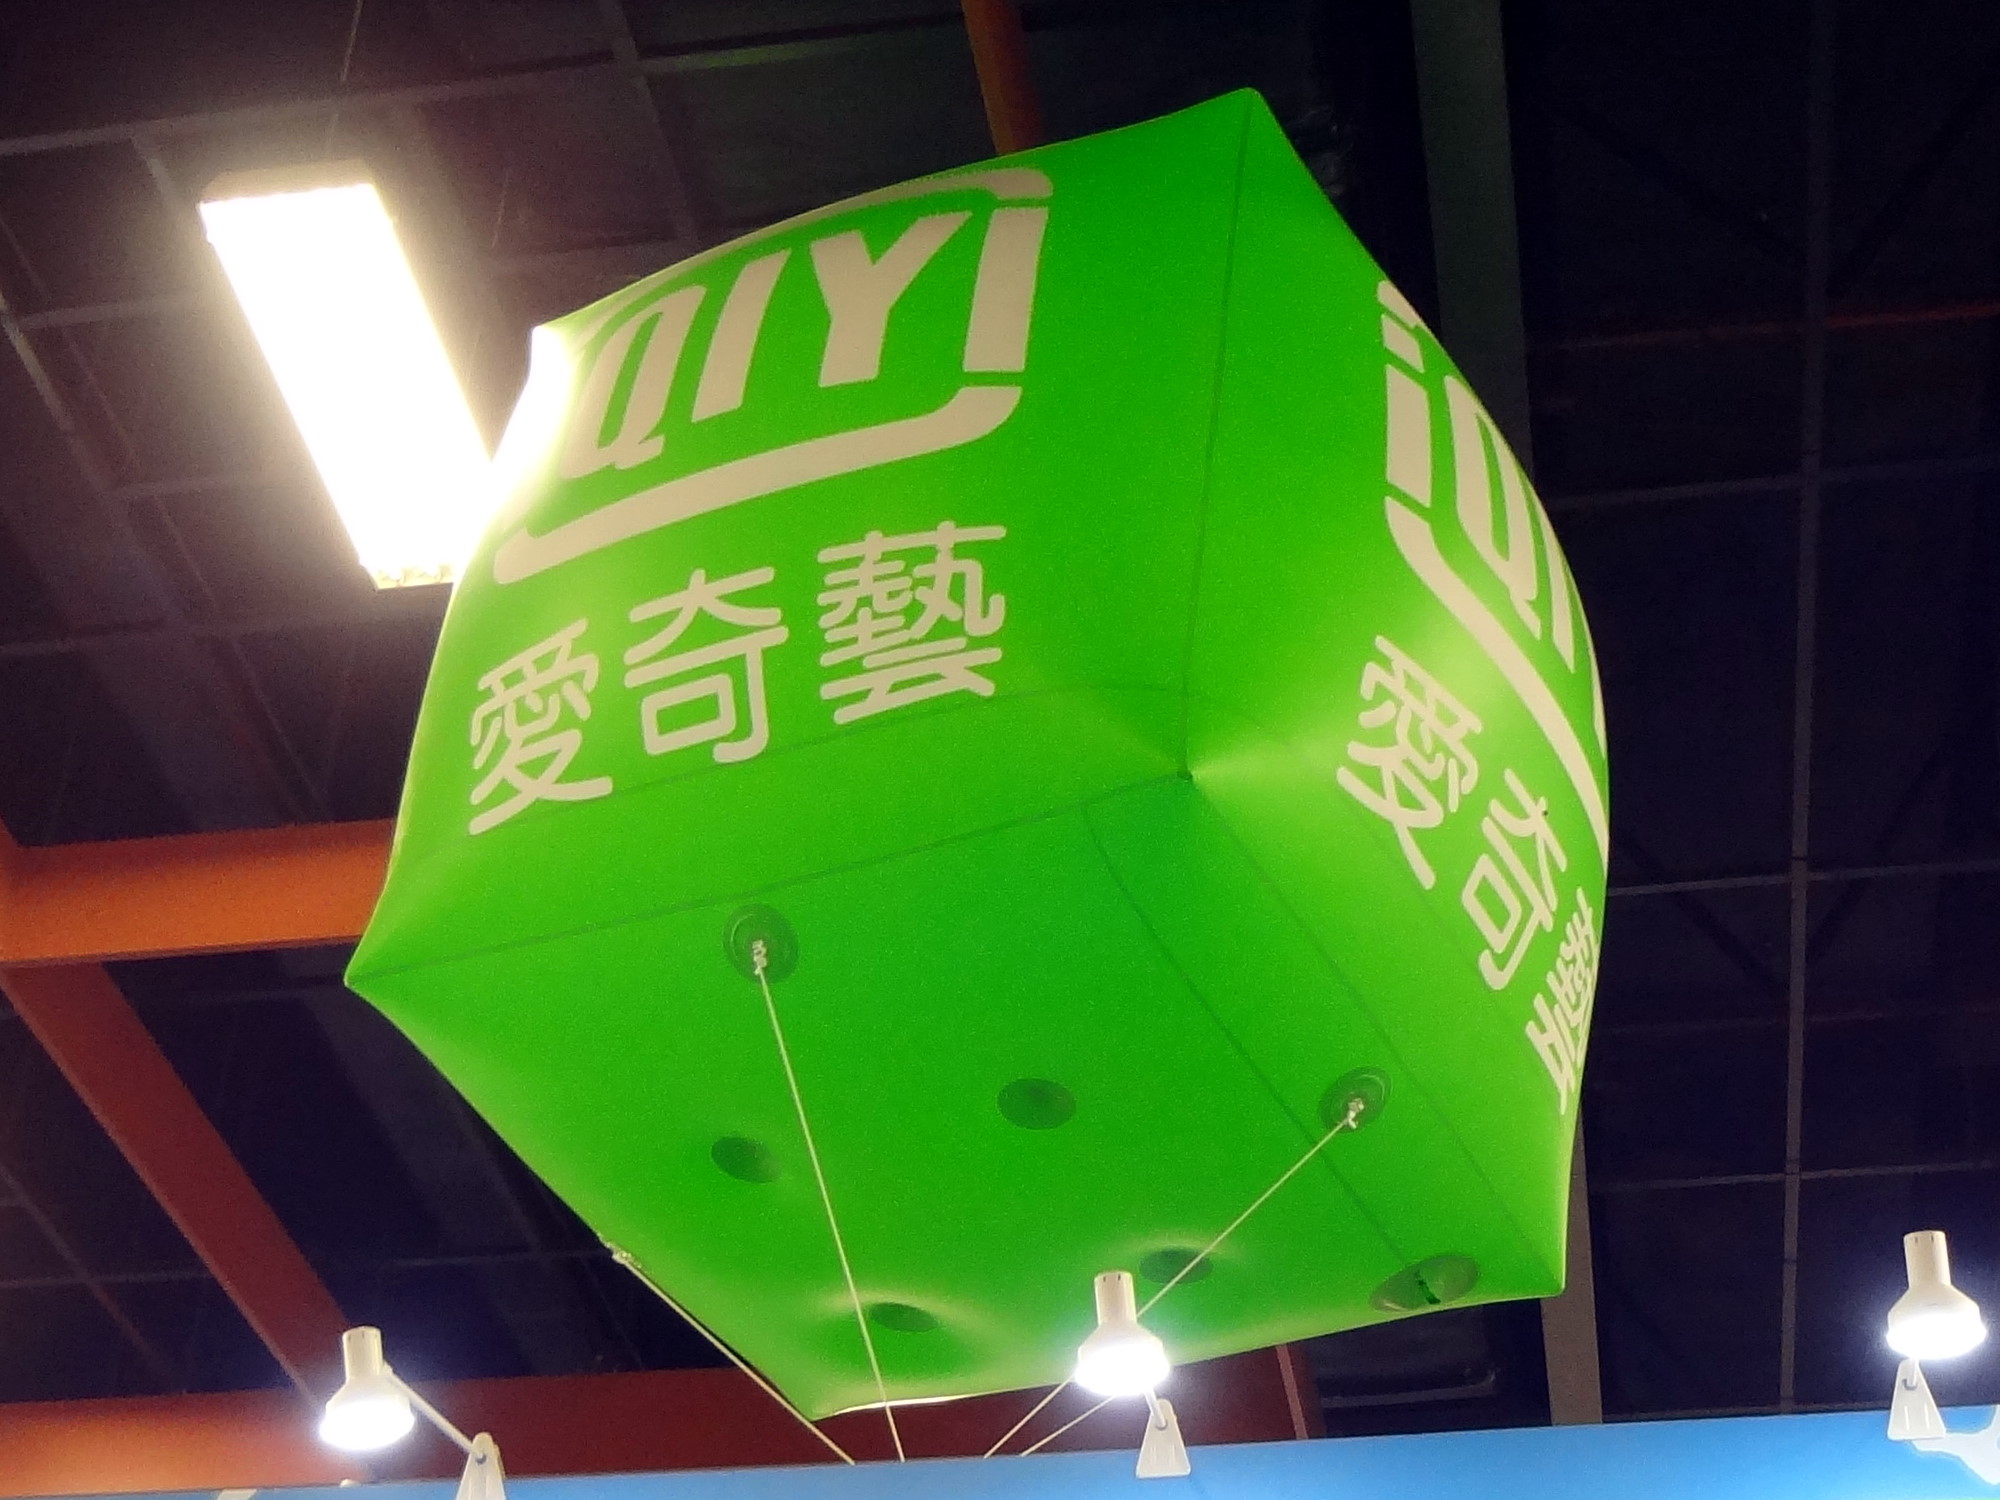 iQIYI’s new strategy: establish offline brick-and-mortar stores and set up a new consumer brand incubation fund.